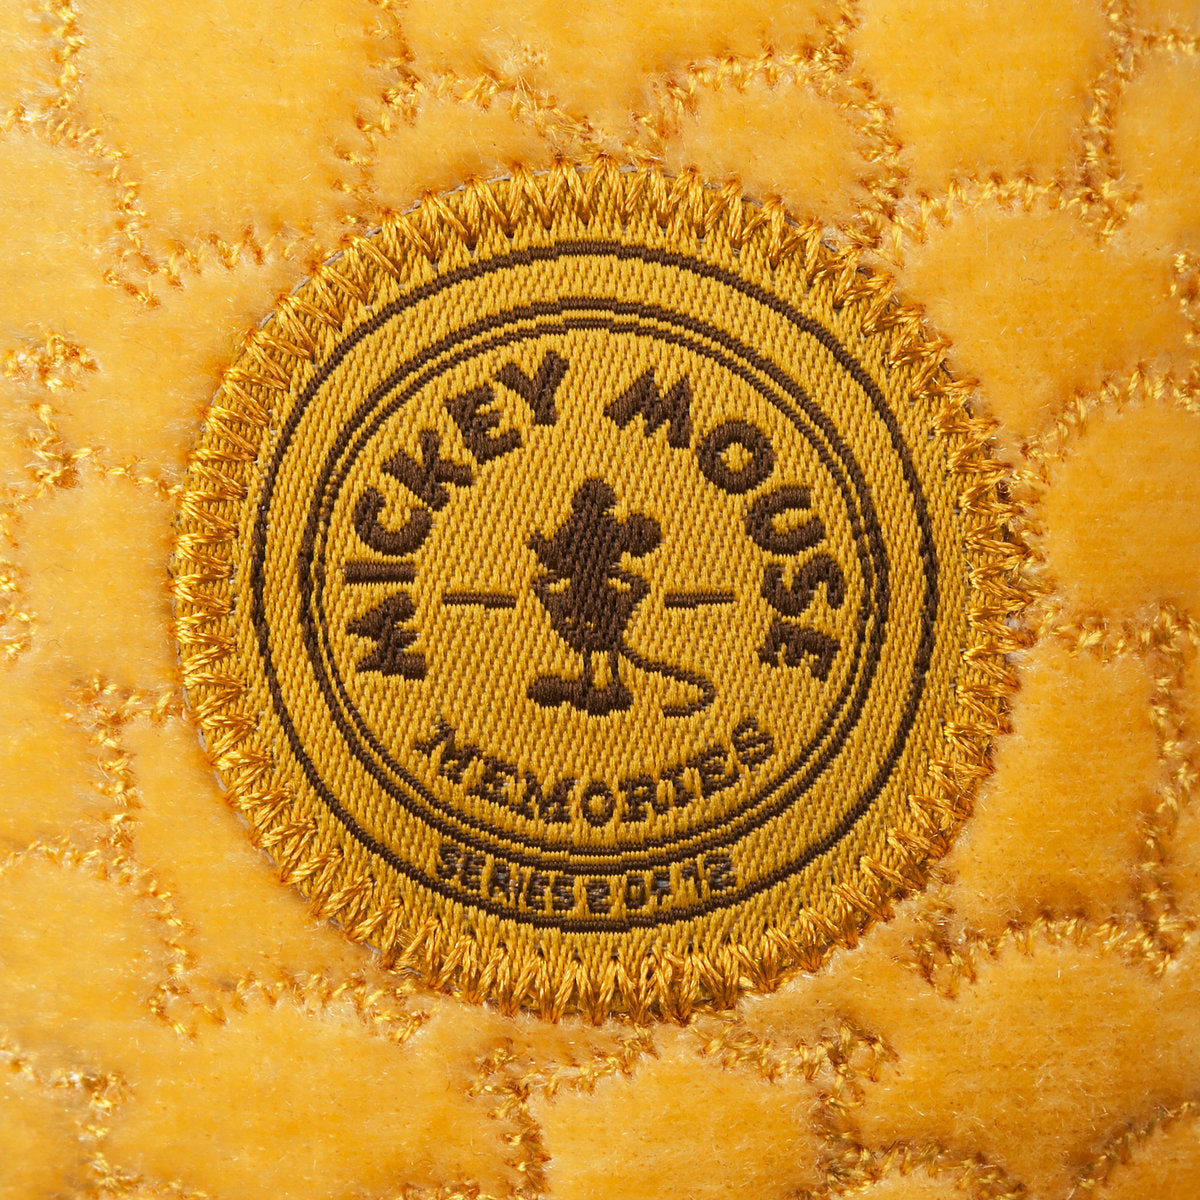 Mickey Mouse Memories Plush - February 2018 - Limited Edition